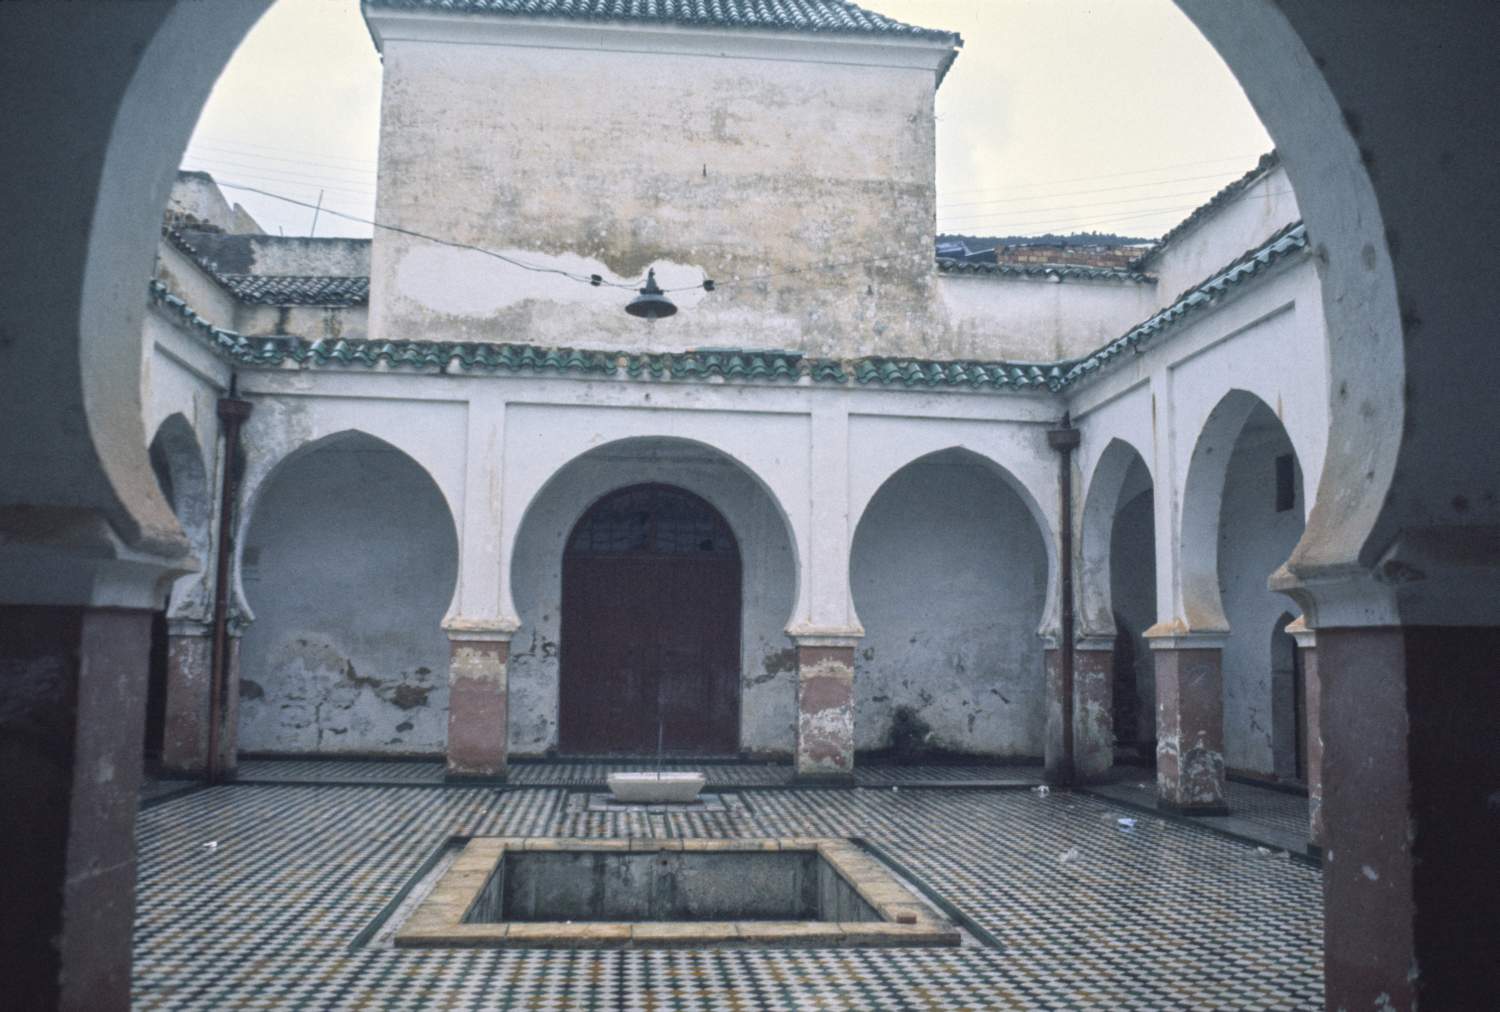 View of the courtyard